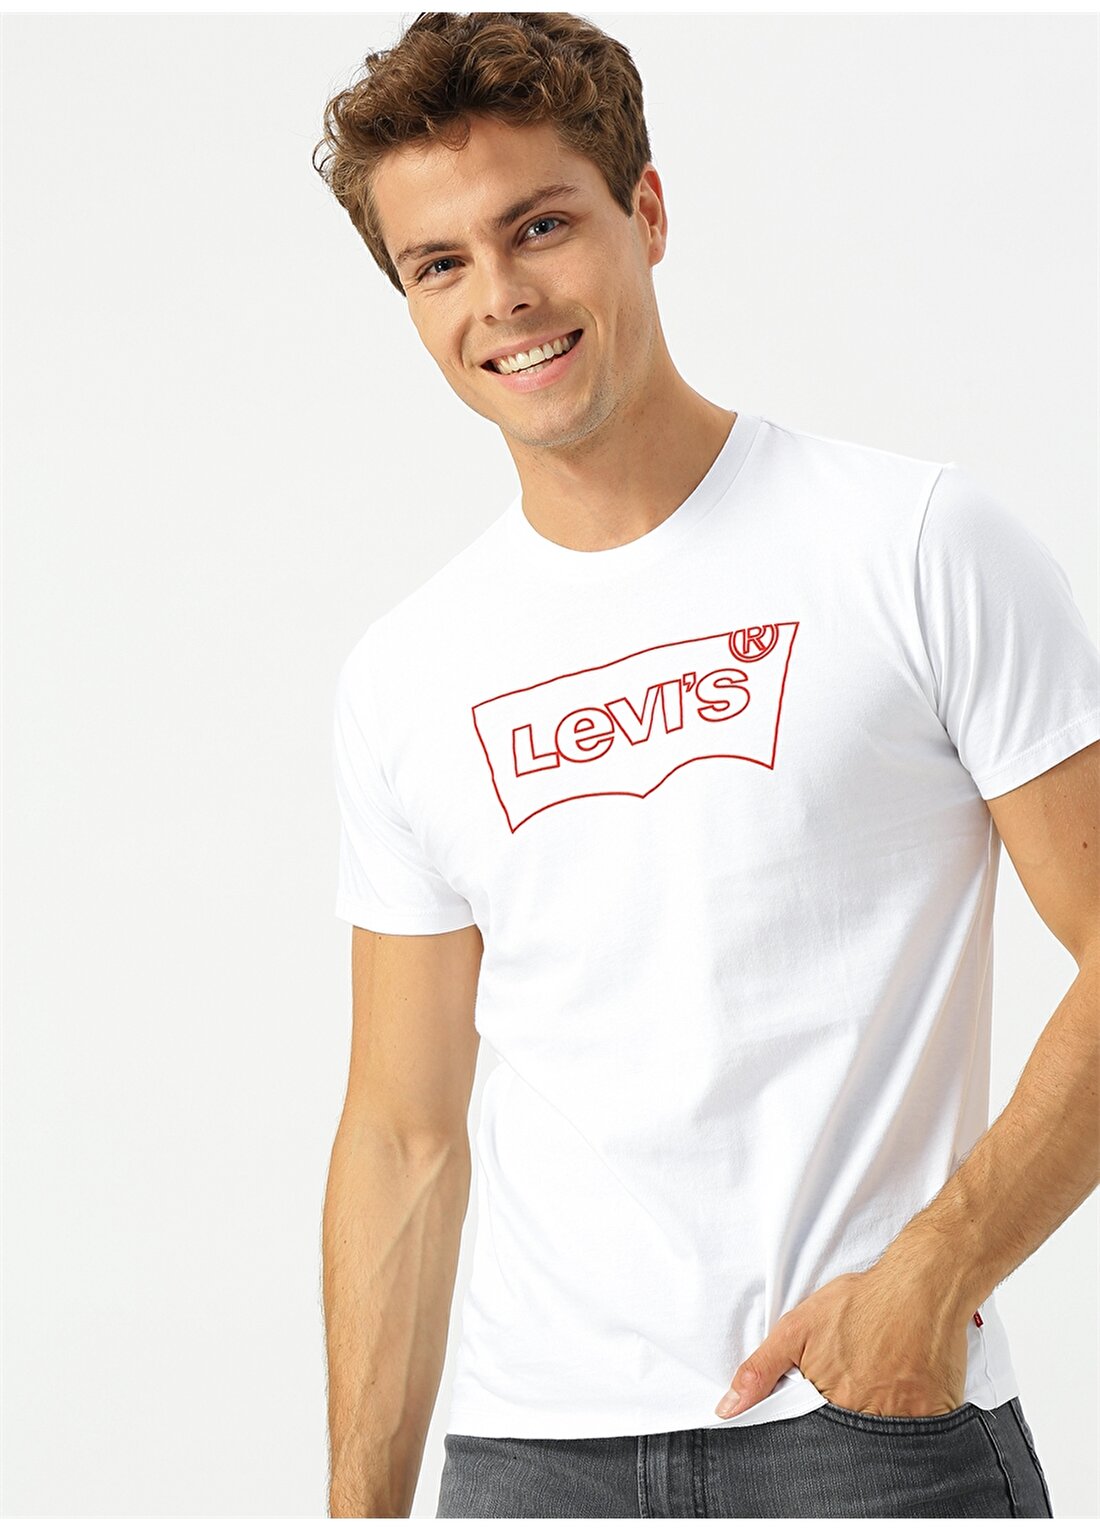 Levis Housemark Graphic Tee Hm Outline White T-Shirt